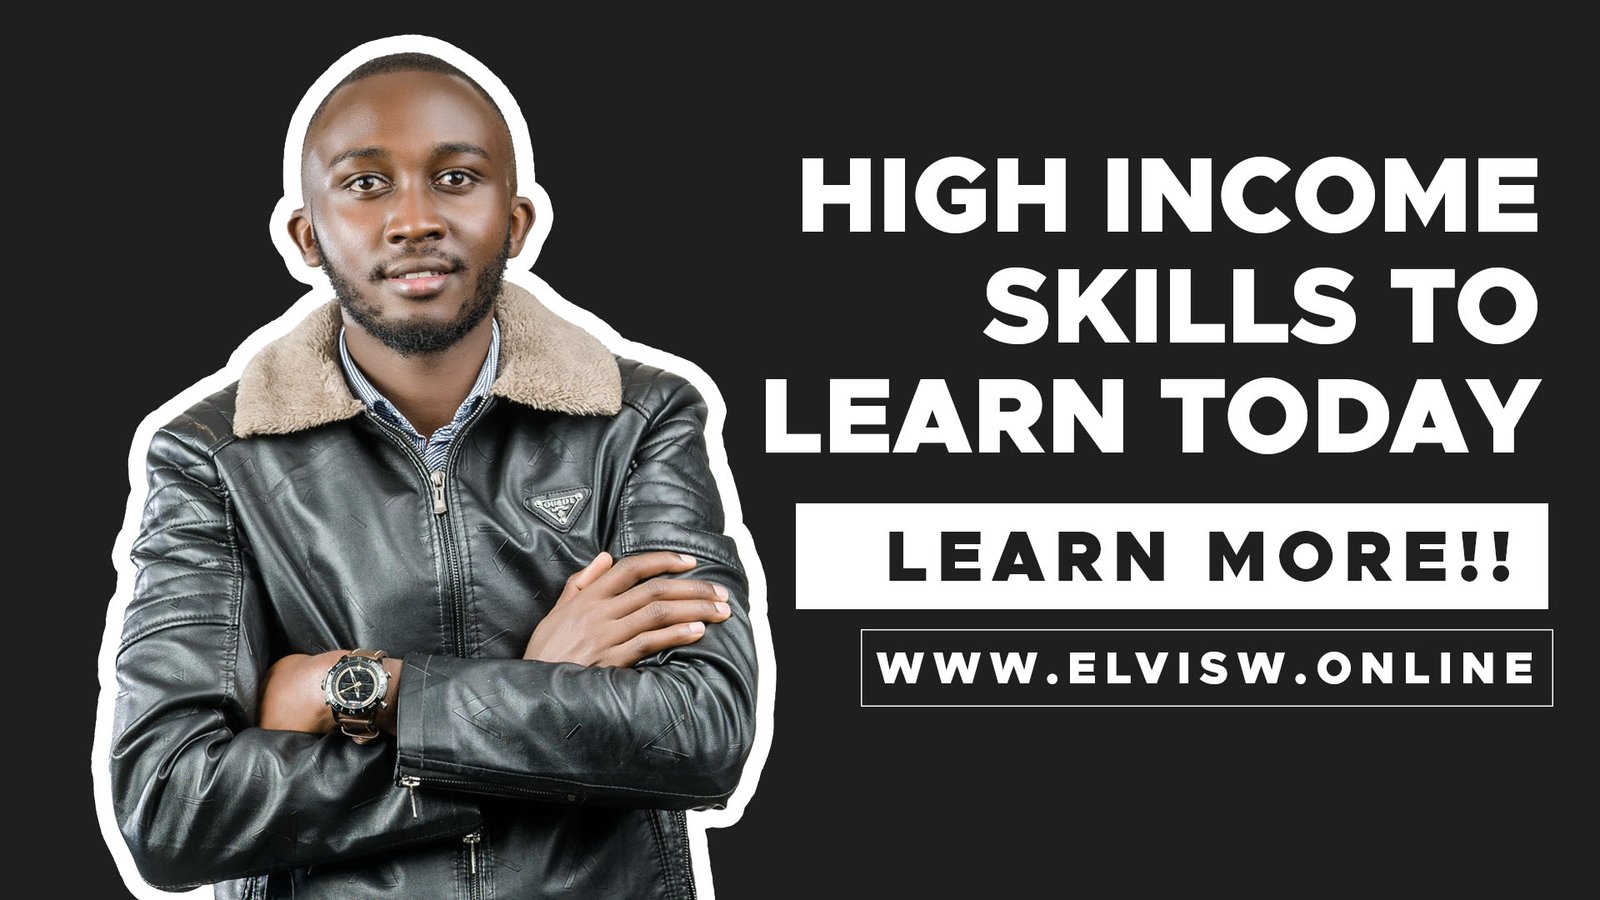 High-Income skills to learn today.